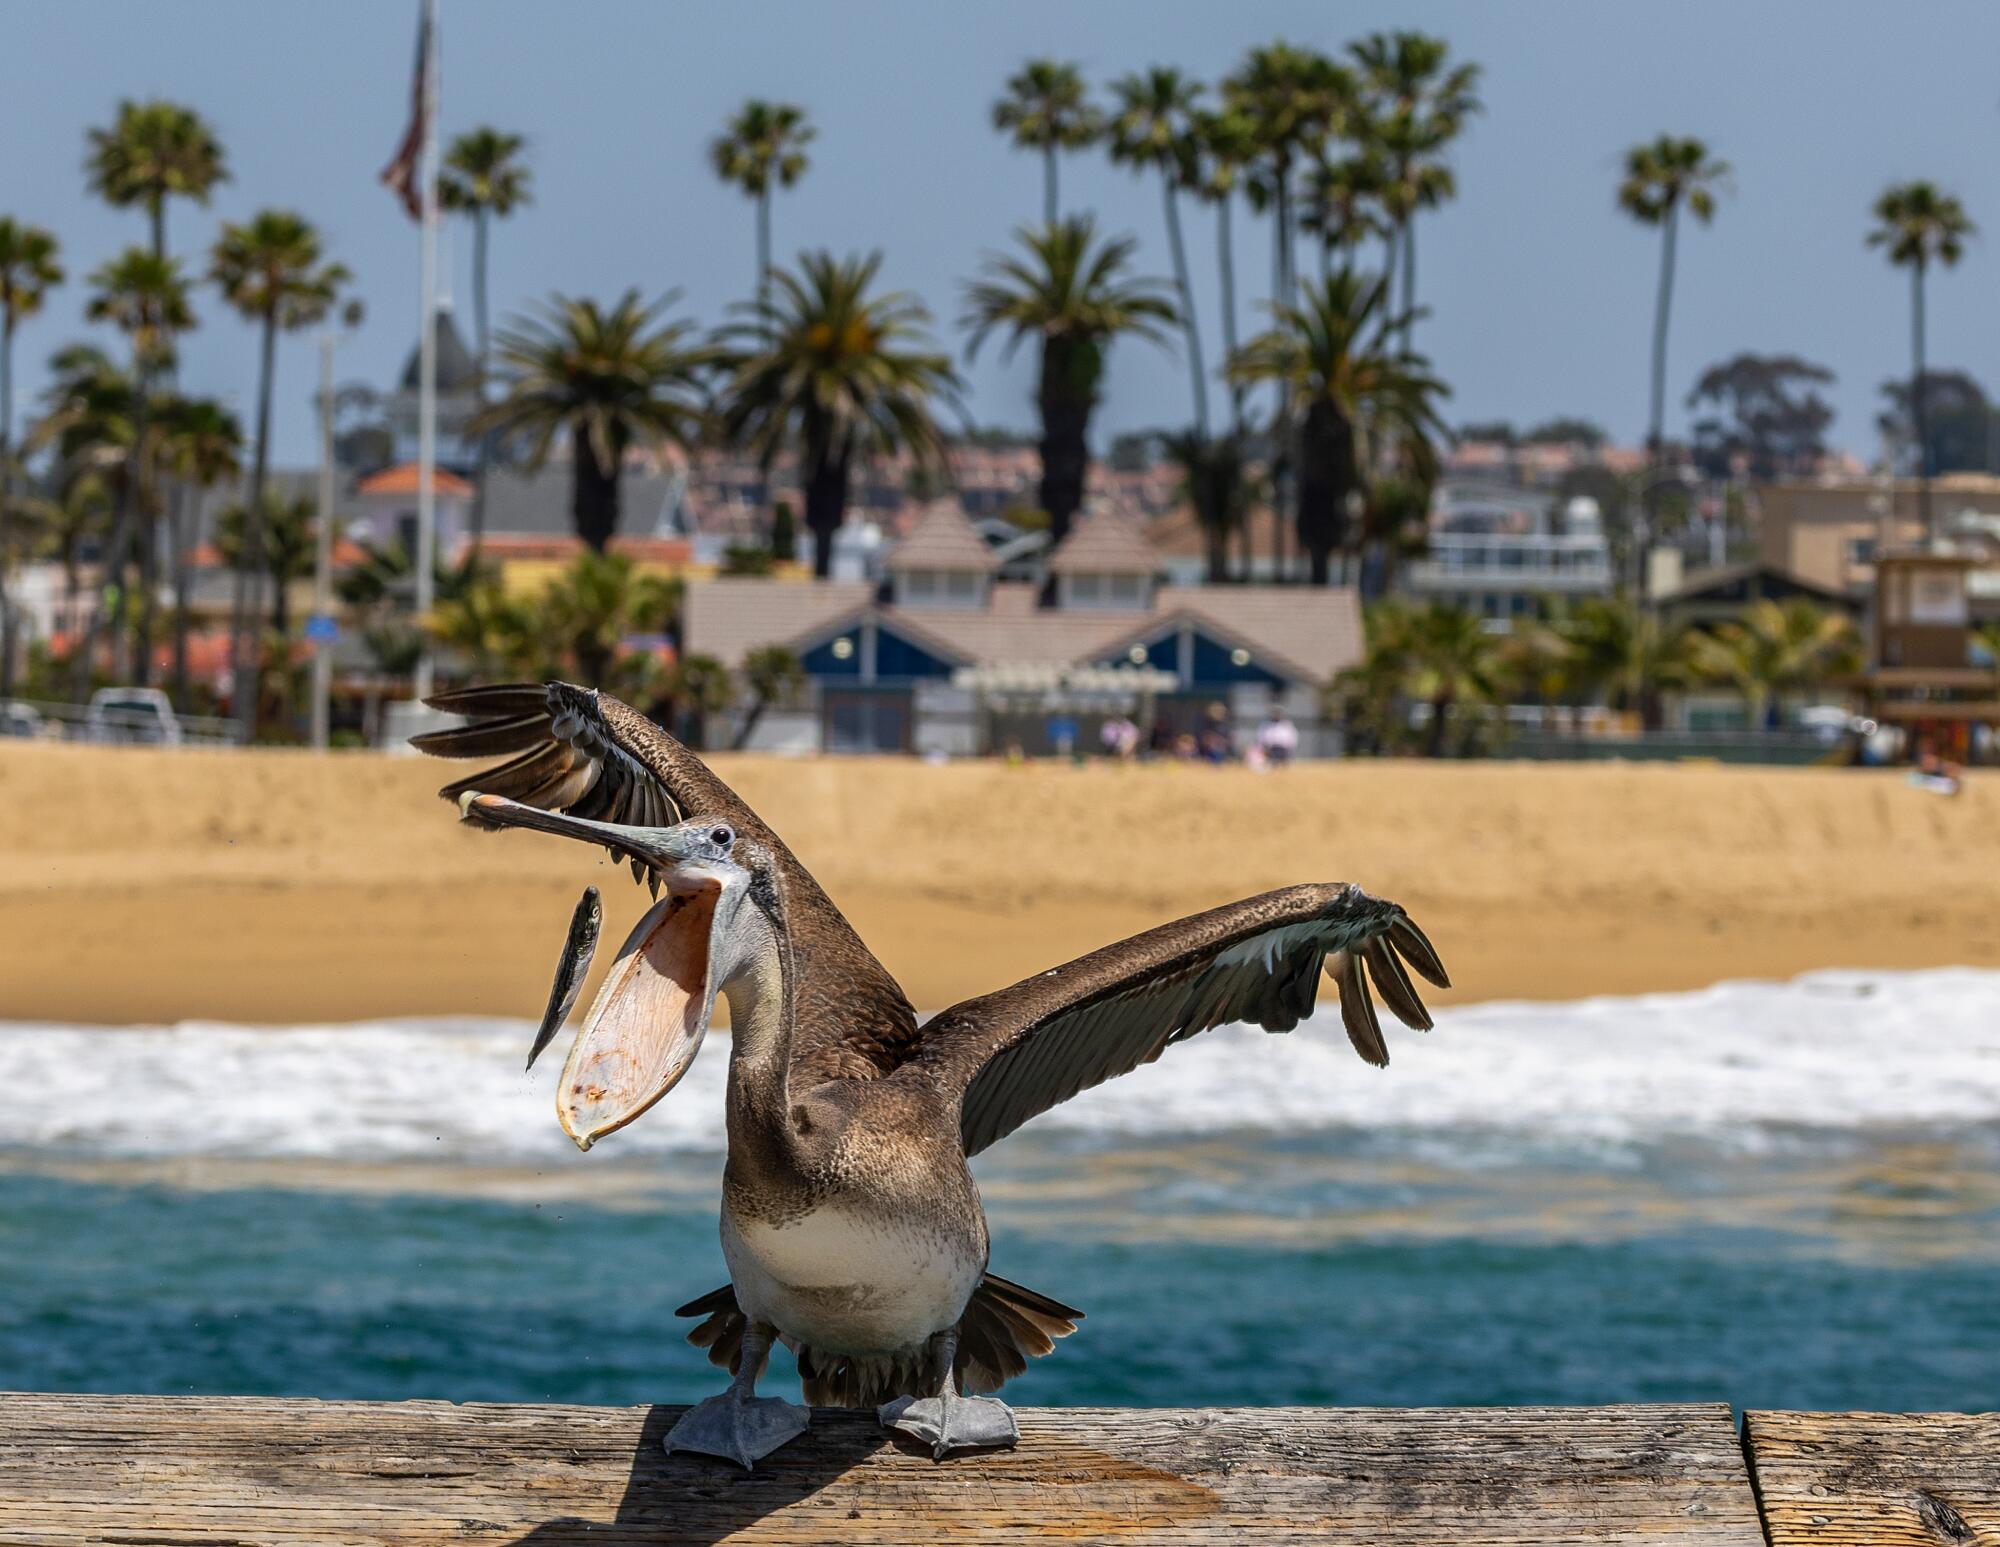 After rescuing two other sick pelicans, Emory Douglas, throws fish to a hungry pelican on the Balboa Pier in Newport Beach.